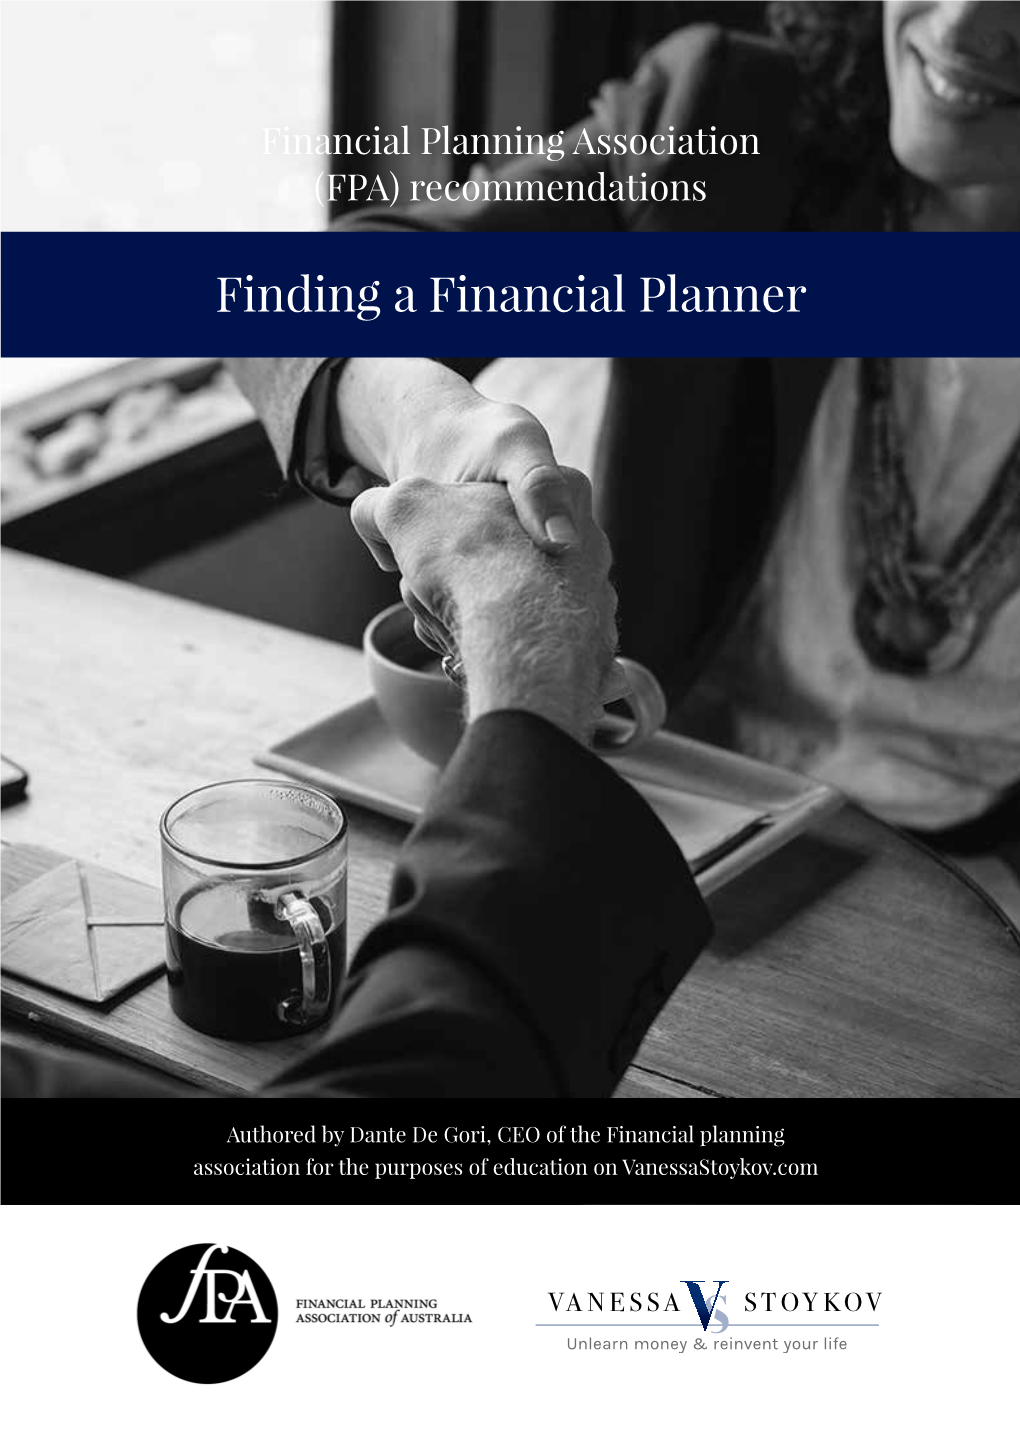 Finding a Financial Planner